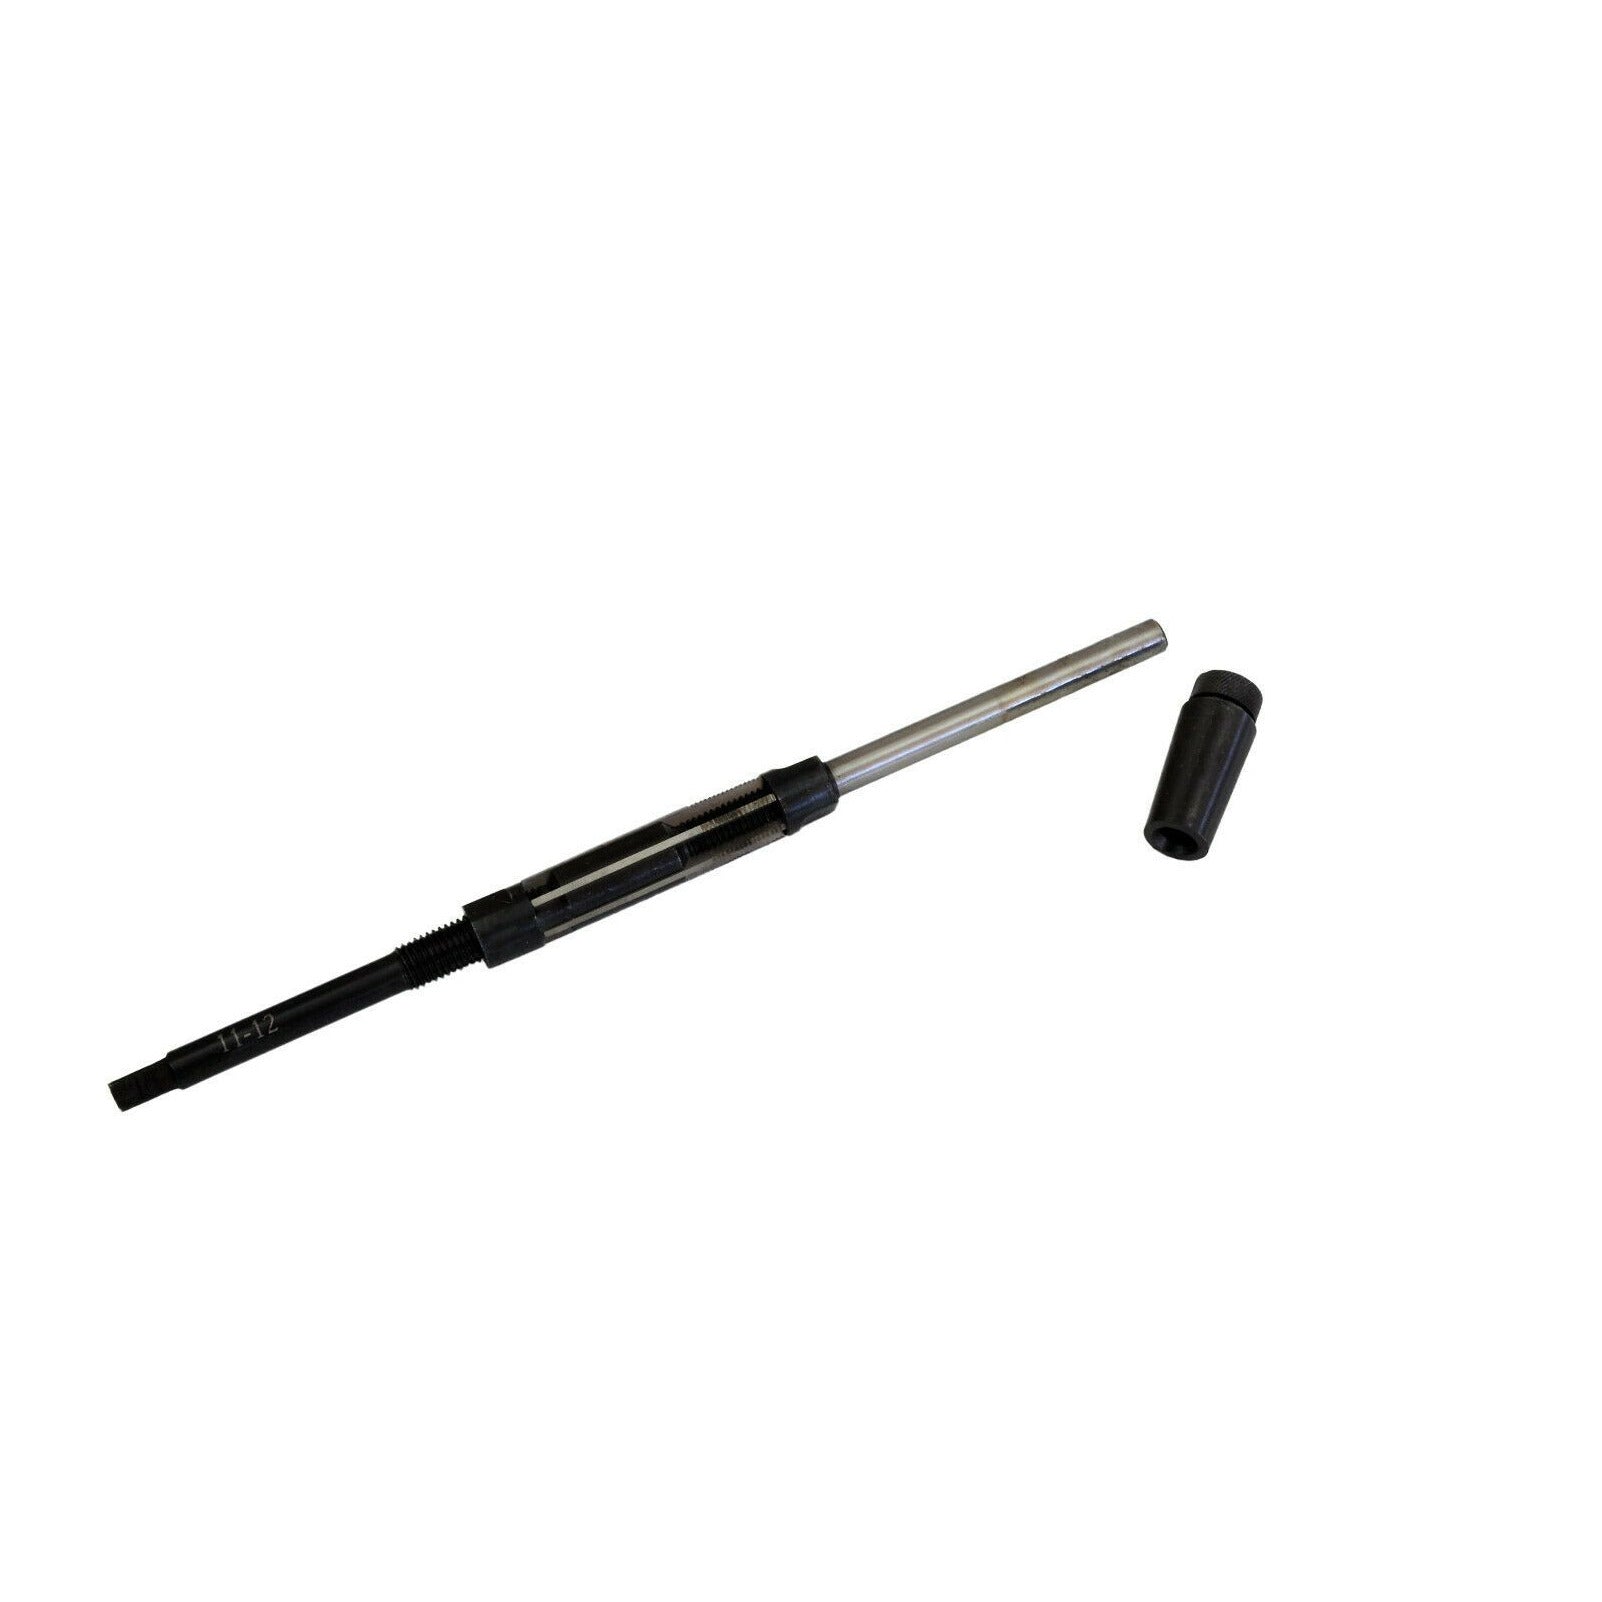 11-12 mm Adjustable Hand Reamer with Guide